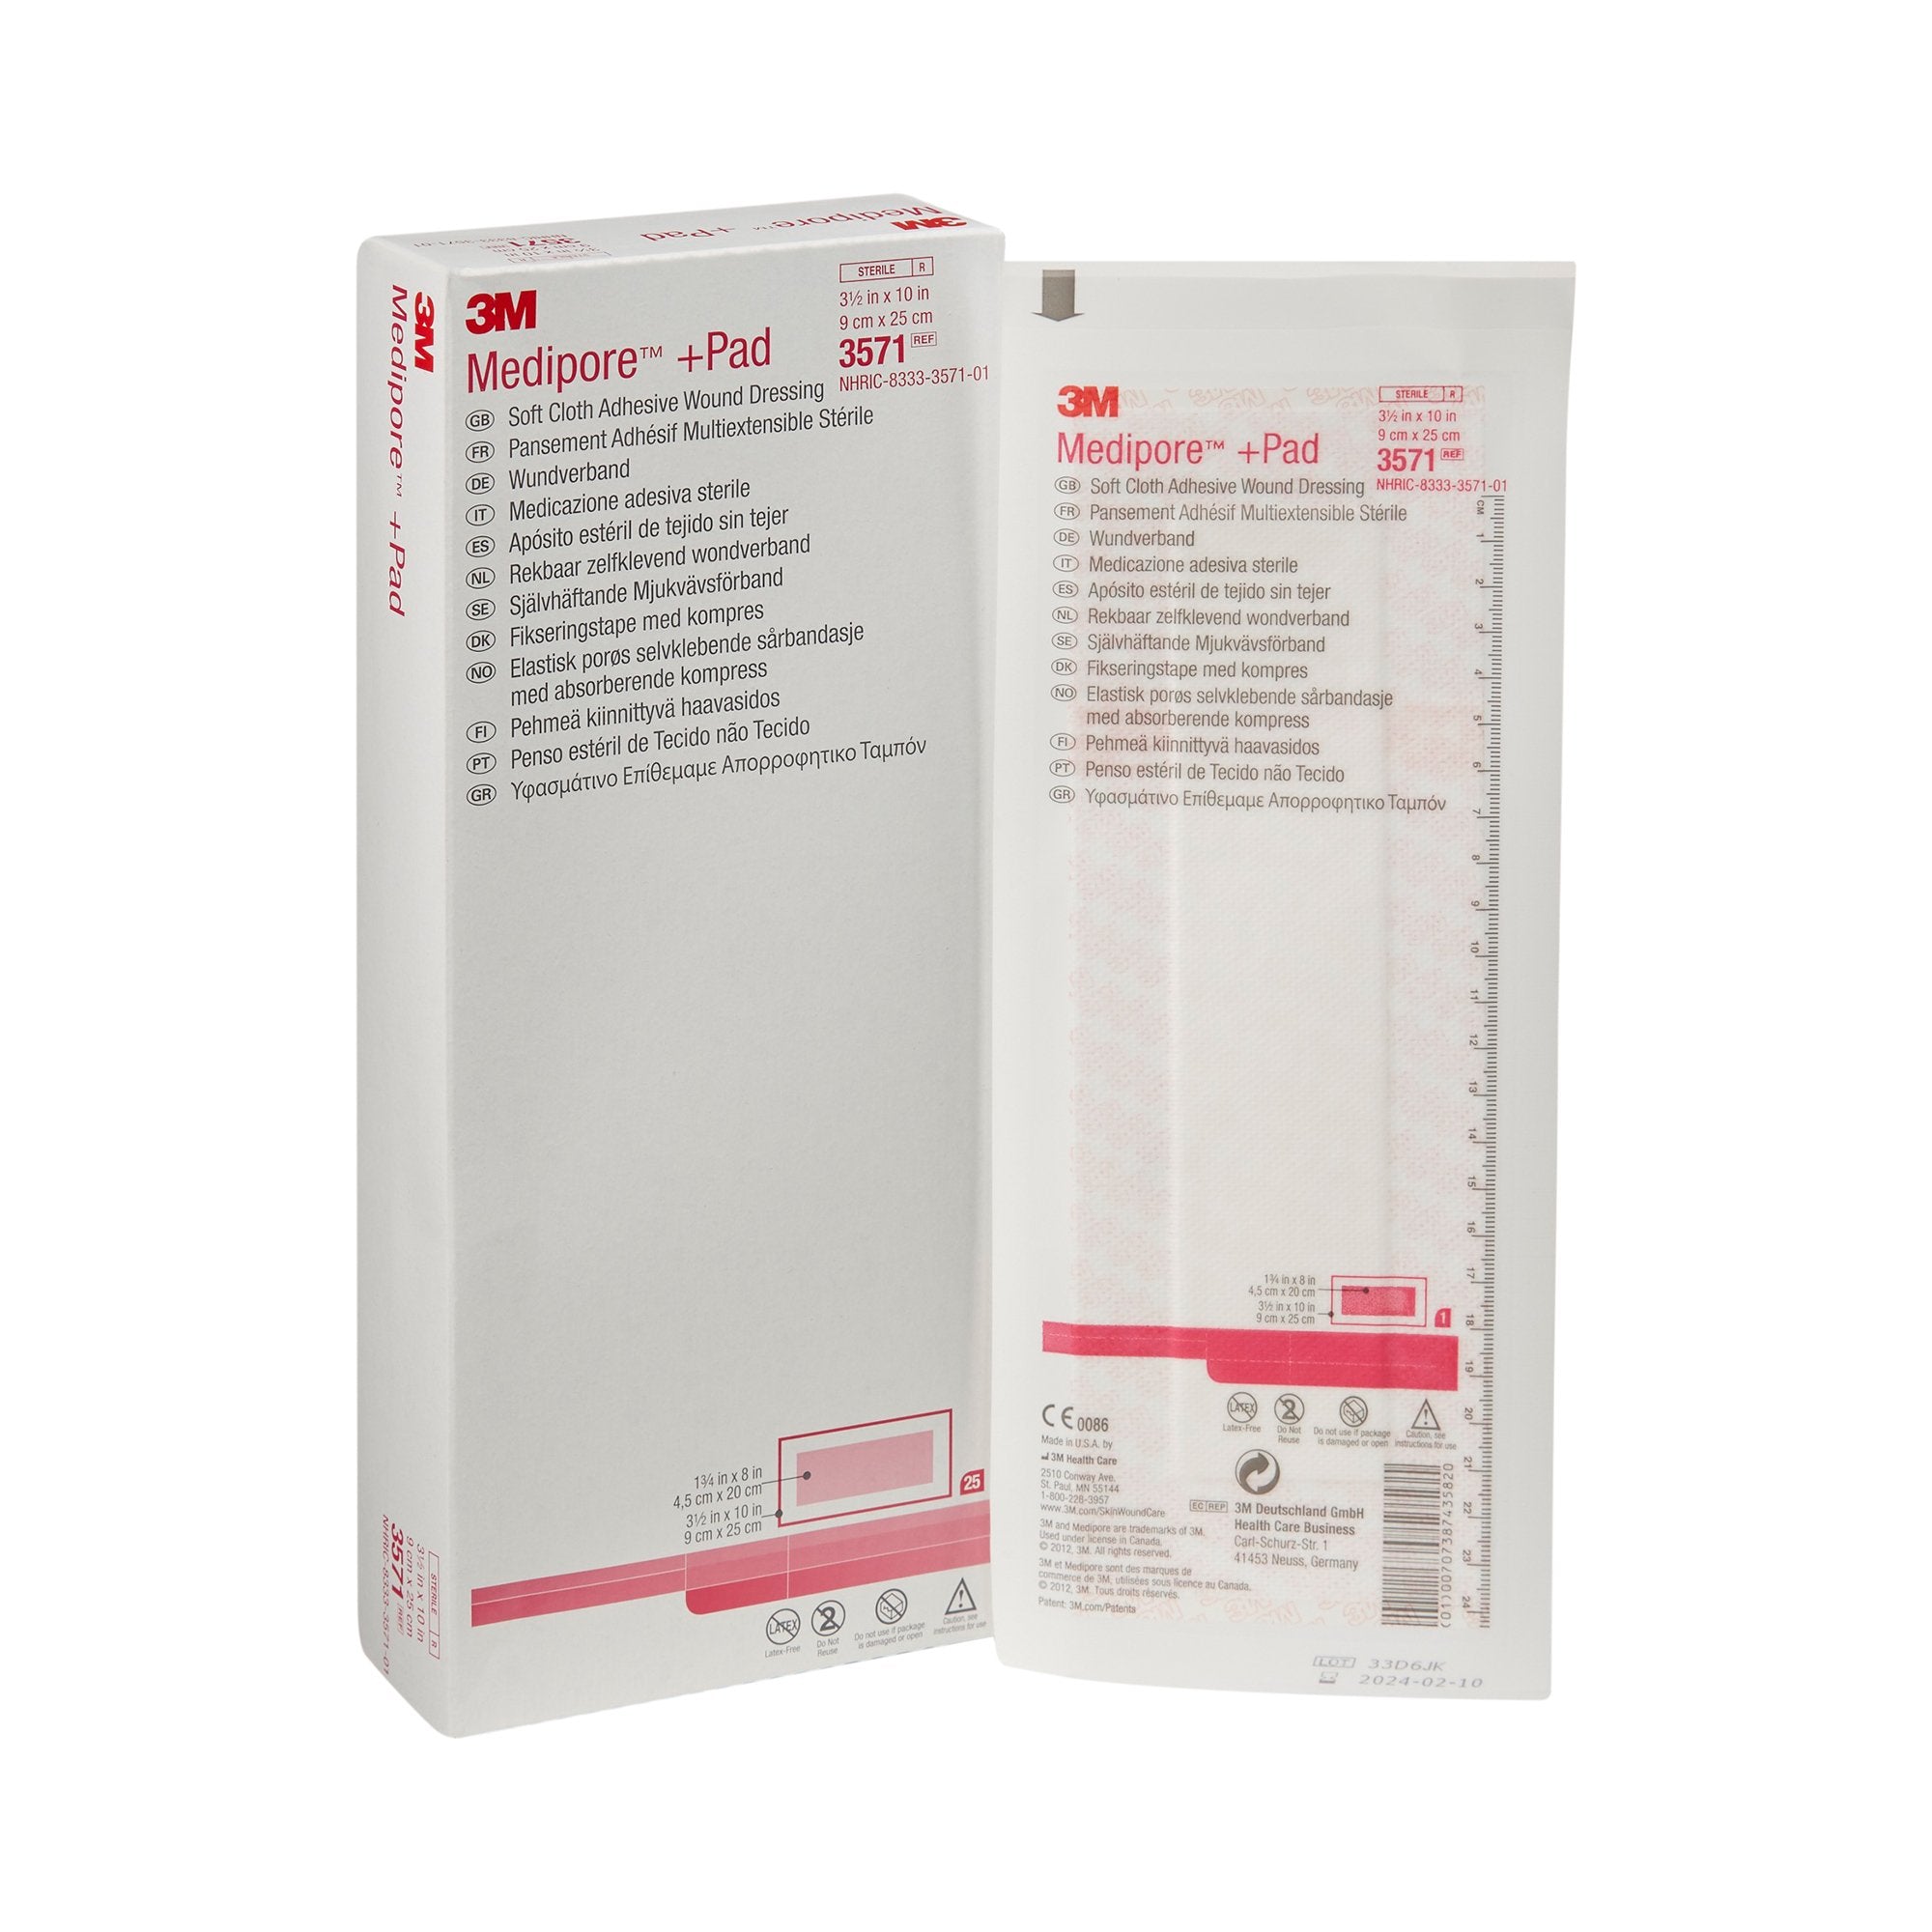 Adhesive Dressing 3M™ Medipore™ 3-1/2 X 10 Inch Soft Cloth Rectangle White Sterile